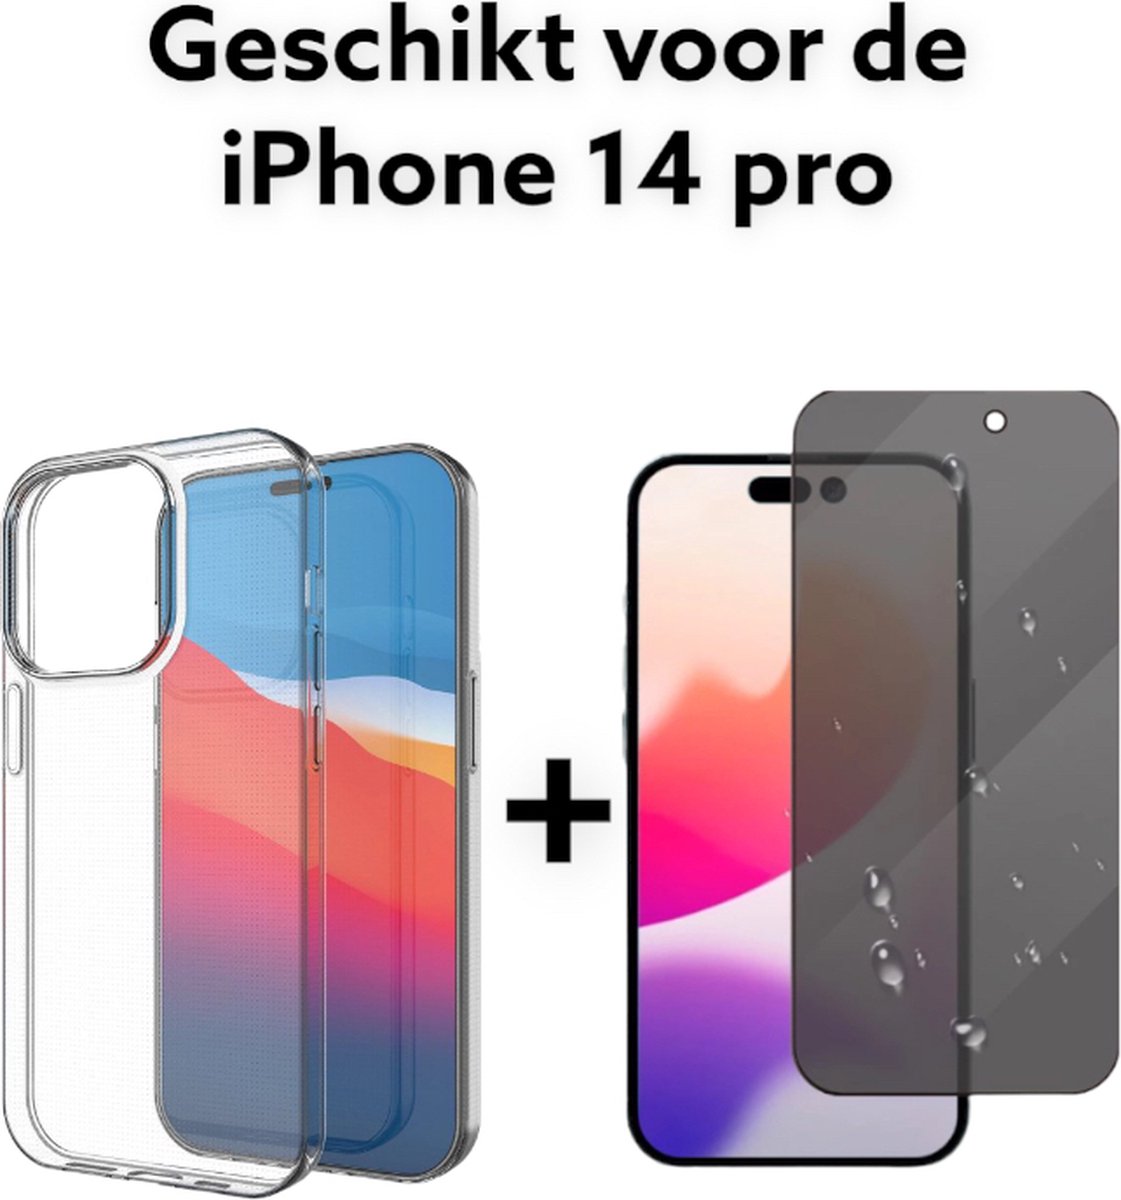 iphone 14 pro hoesje doorzichtig achterkant + privacy screen protector - apple iphone 14 pro hoesje siliconen transparant back cover + privacy tempered glas